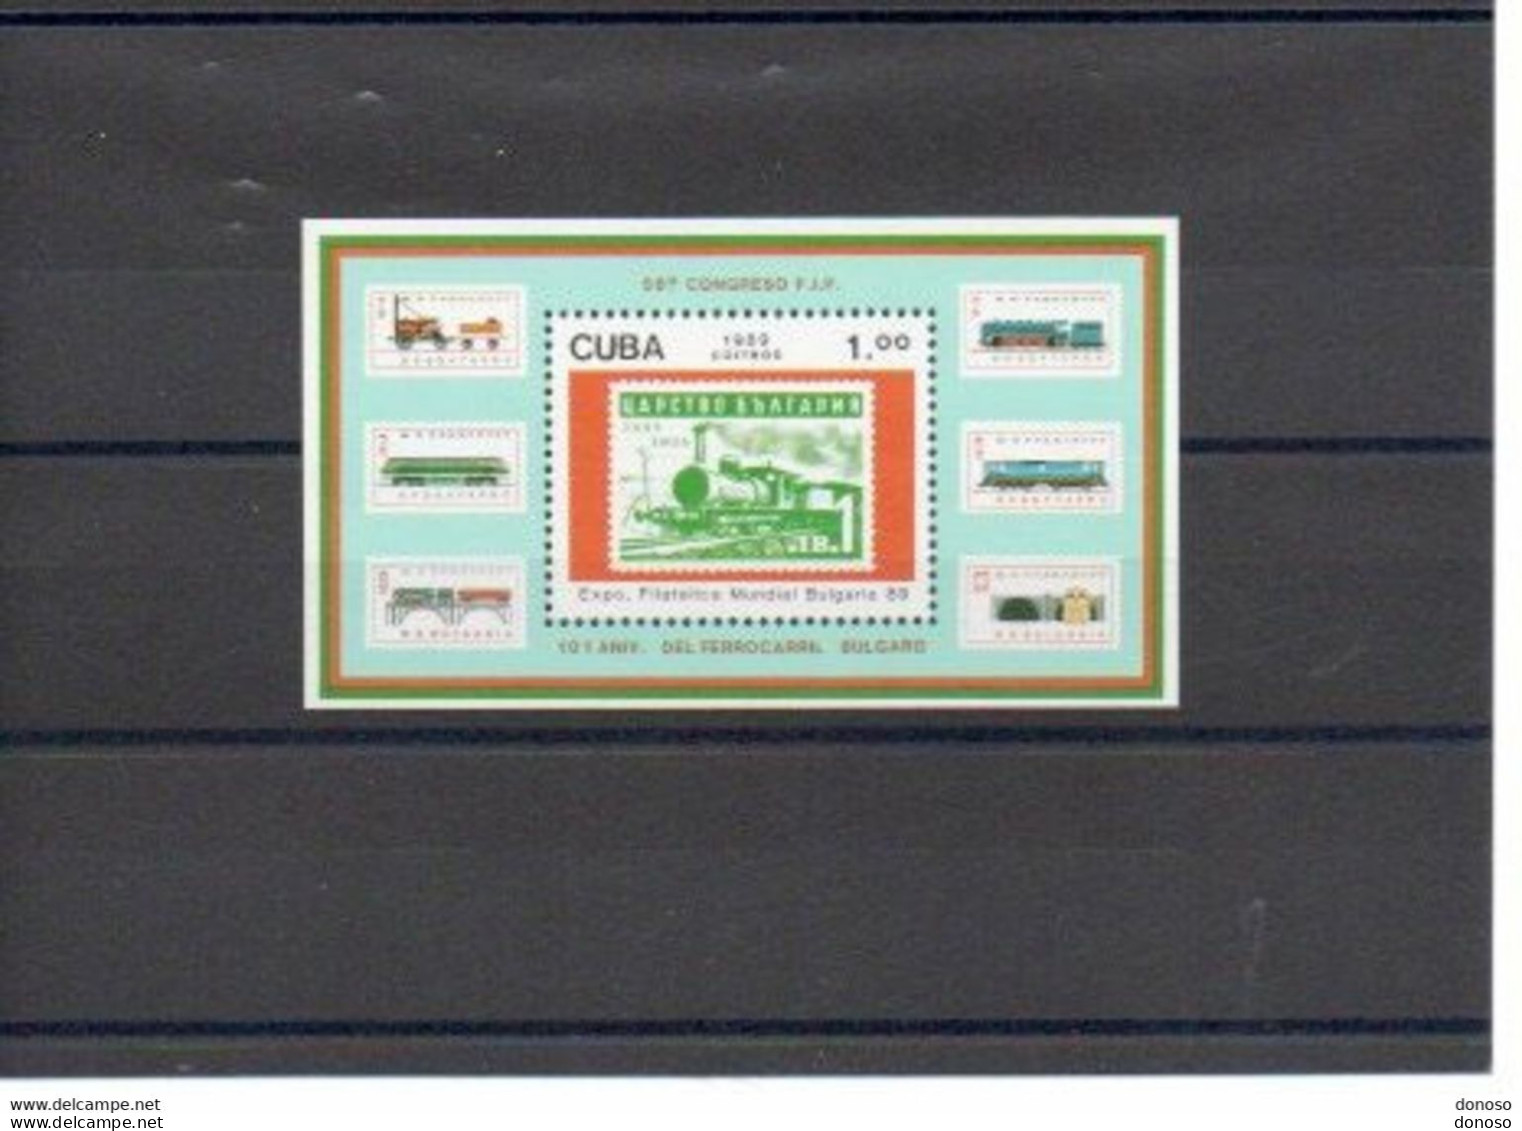 CUBA 1989 TRAINS TIMBRES SUR TIMBRES Yvert BF 114, Michel Block 115 NEUF** MNH - Hojas Y Bloques